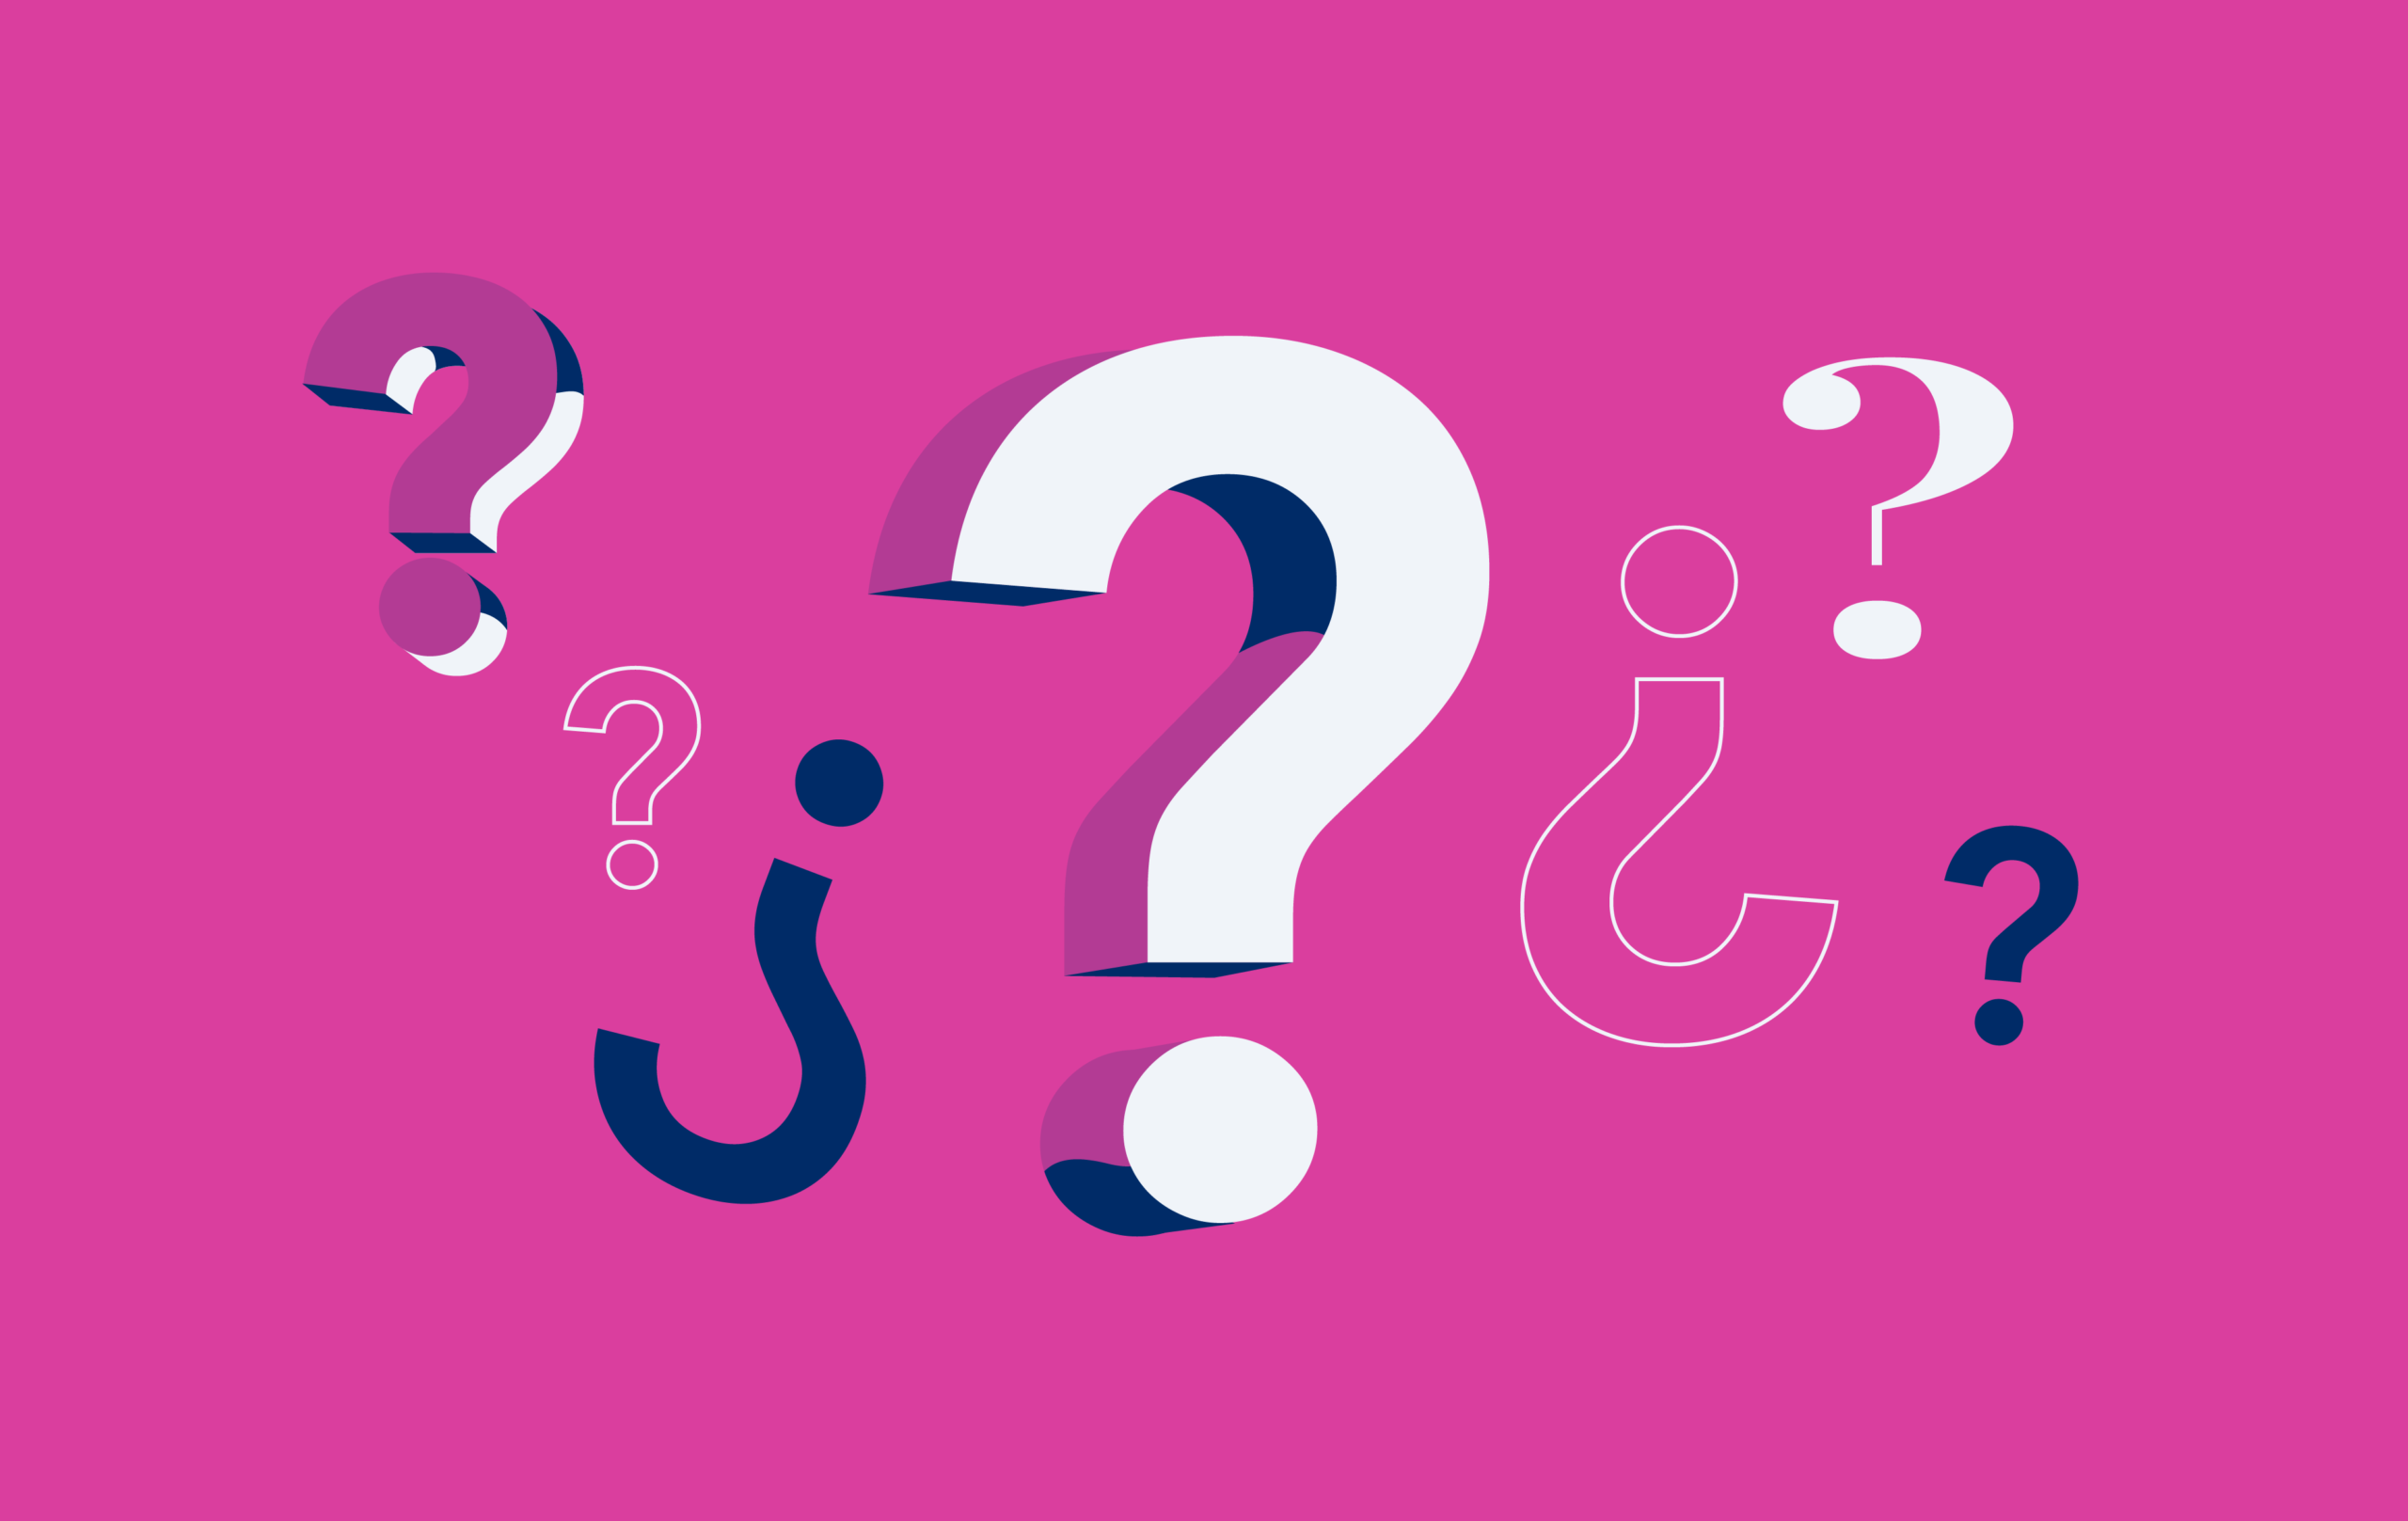 an abstract illustration of multiple question marks